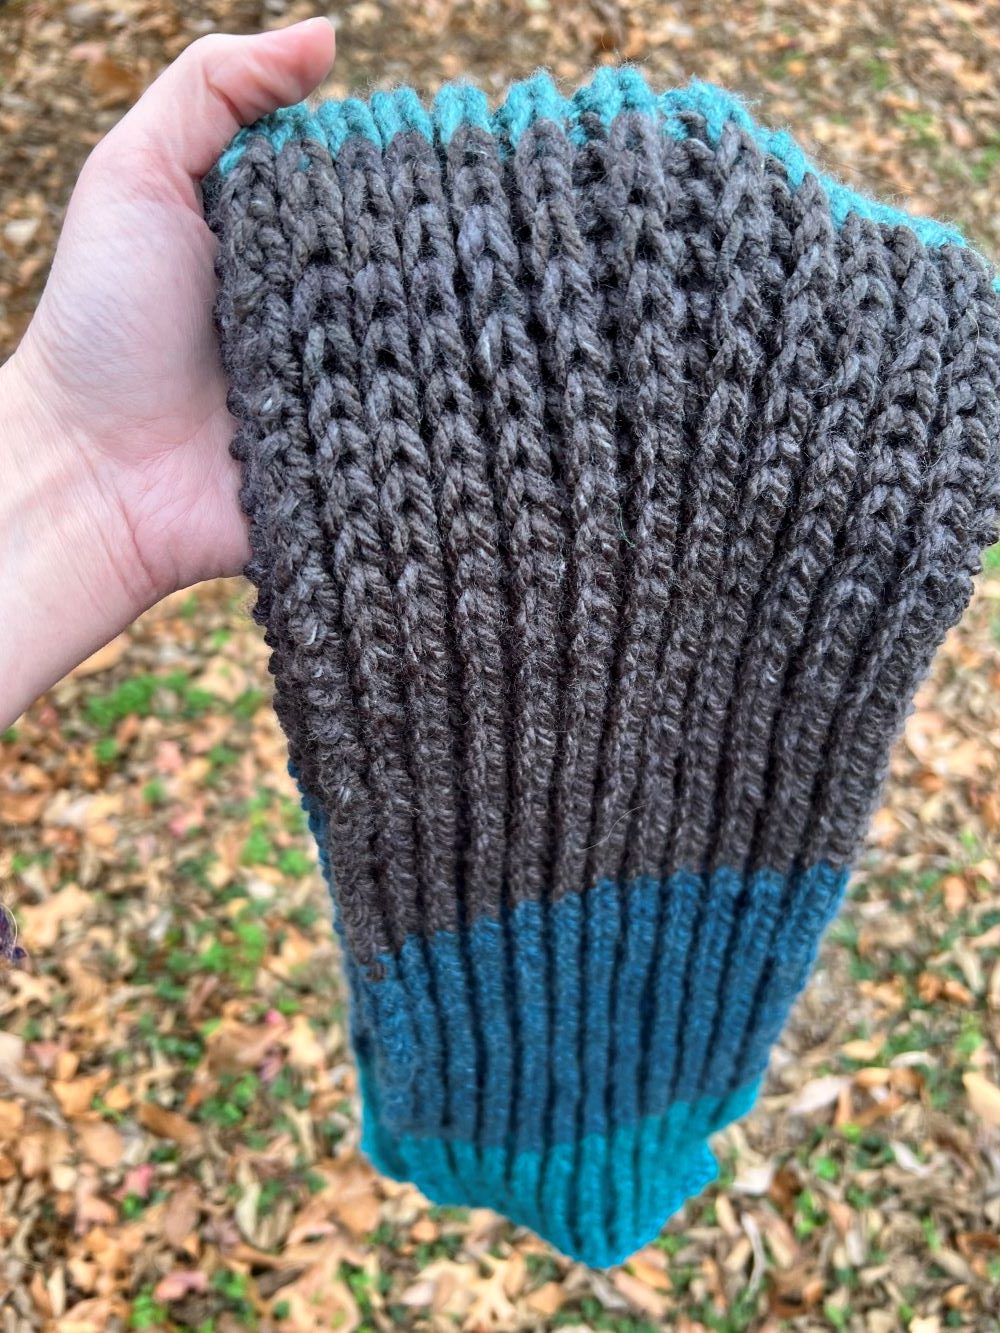 Fisherman's Rib Scarf Knitting Pattern - Our Daily Craft